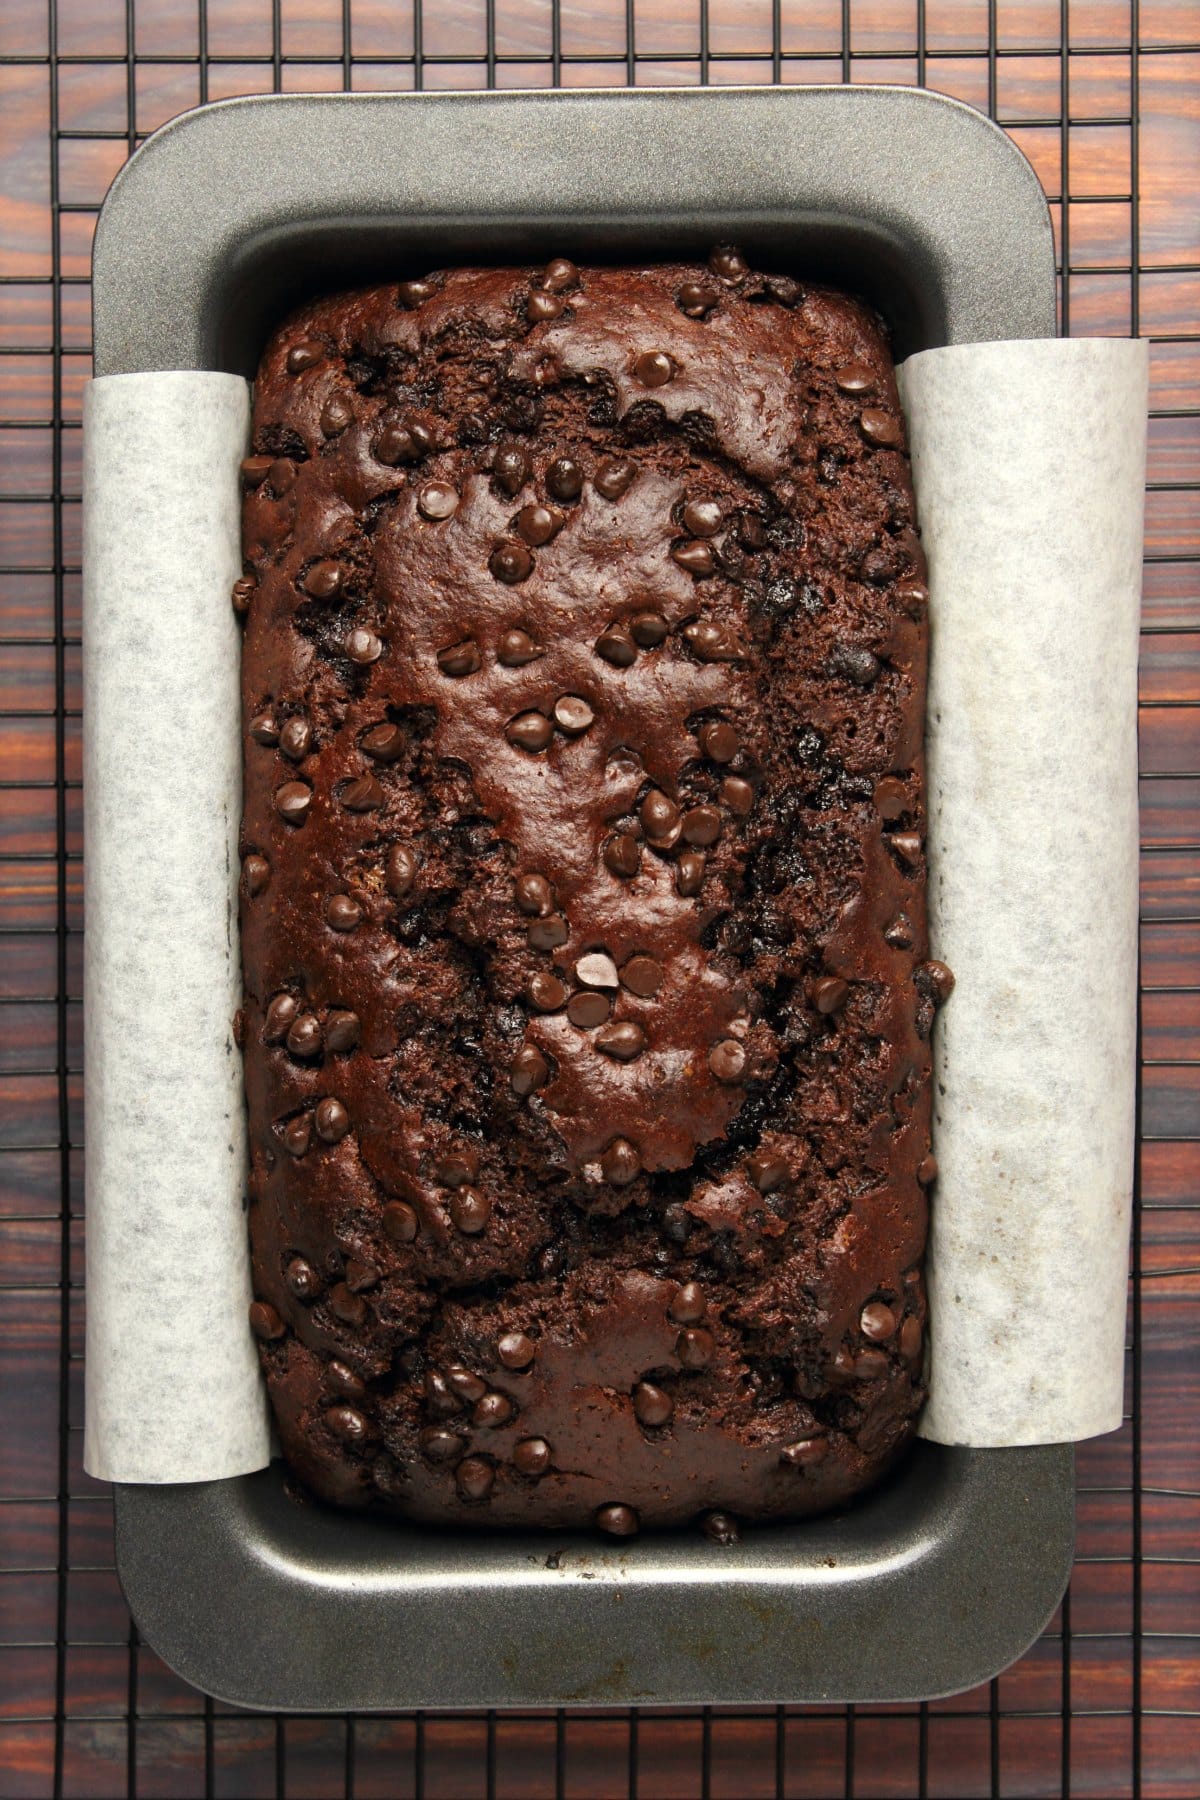 Freshly baked chocolate banana bread in a loaf pan.